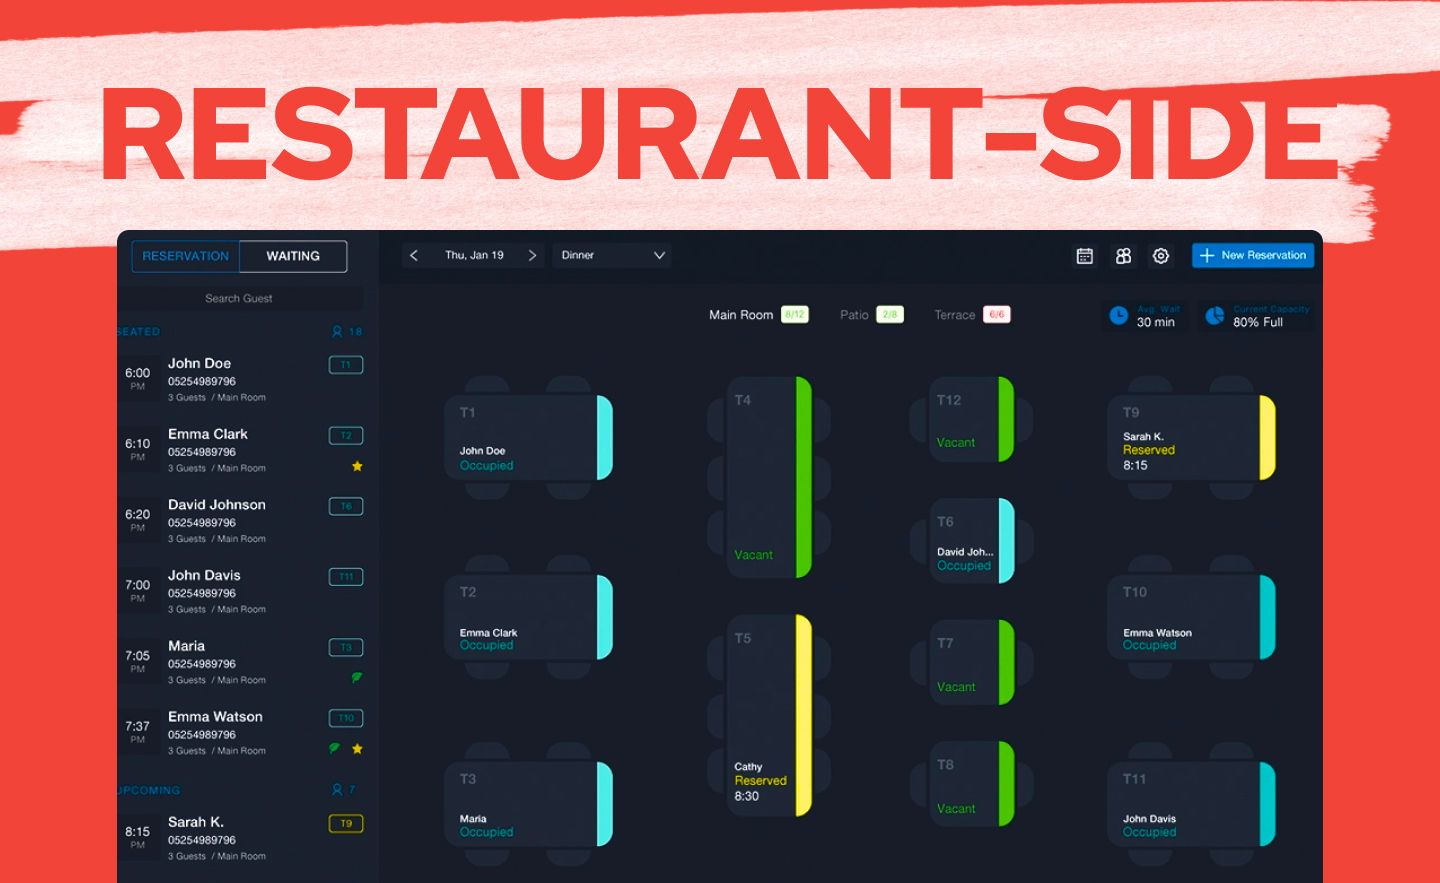 Features for the restaurant-side app